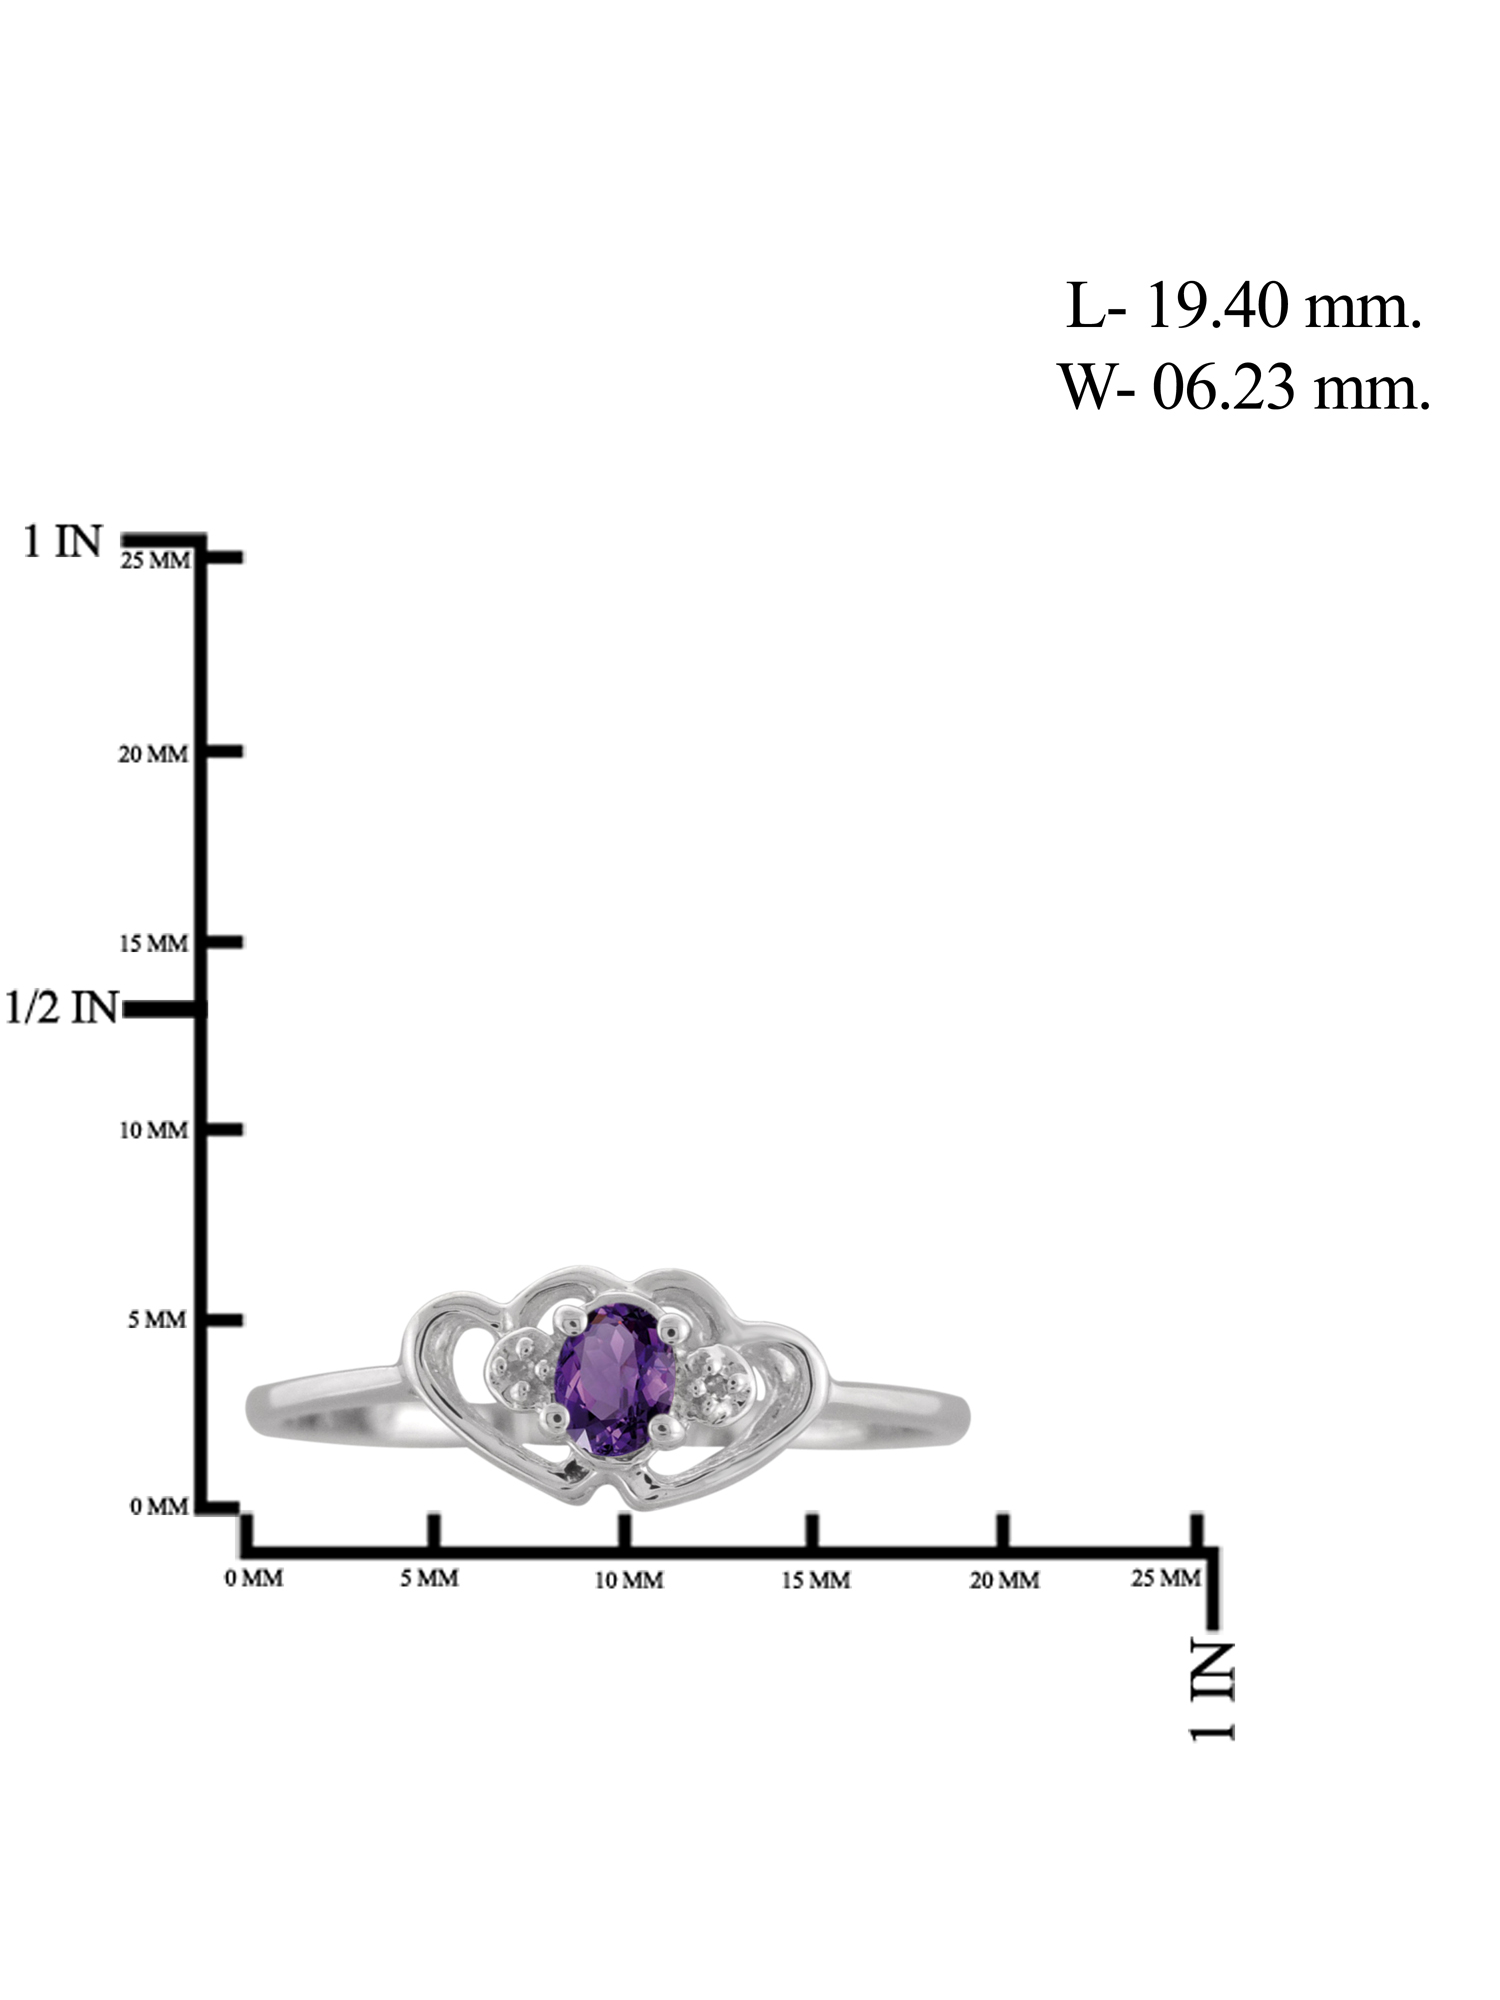 JewelersClub Amethyst Ring Birthstone Jewelry – 0.15 Carat Amethyst 0.925 Sterling Silver Ring Jewelry with White Diamond Accent – Gemstone Rings with Hypoallergenic 0.925 Sterling Silver Band - image 3 of 4